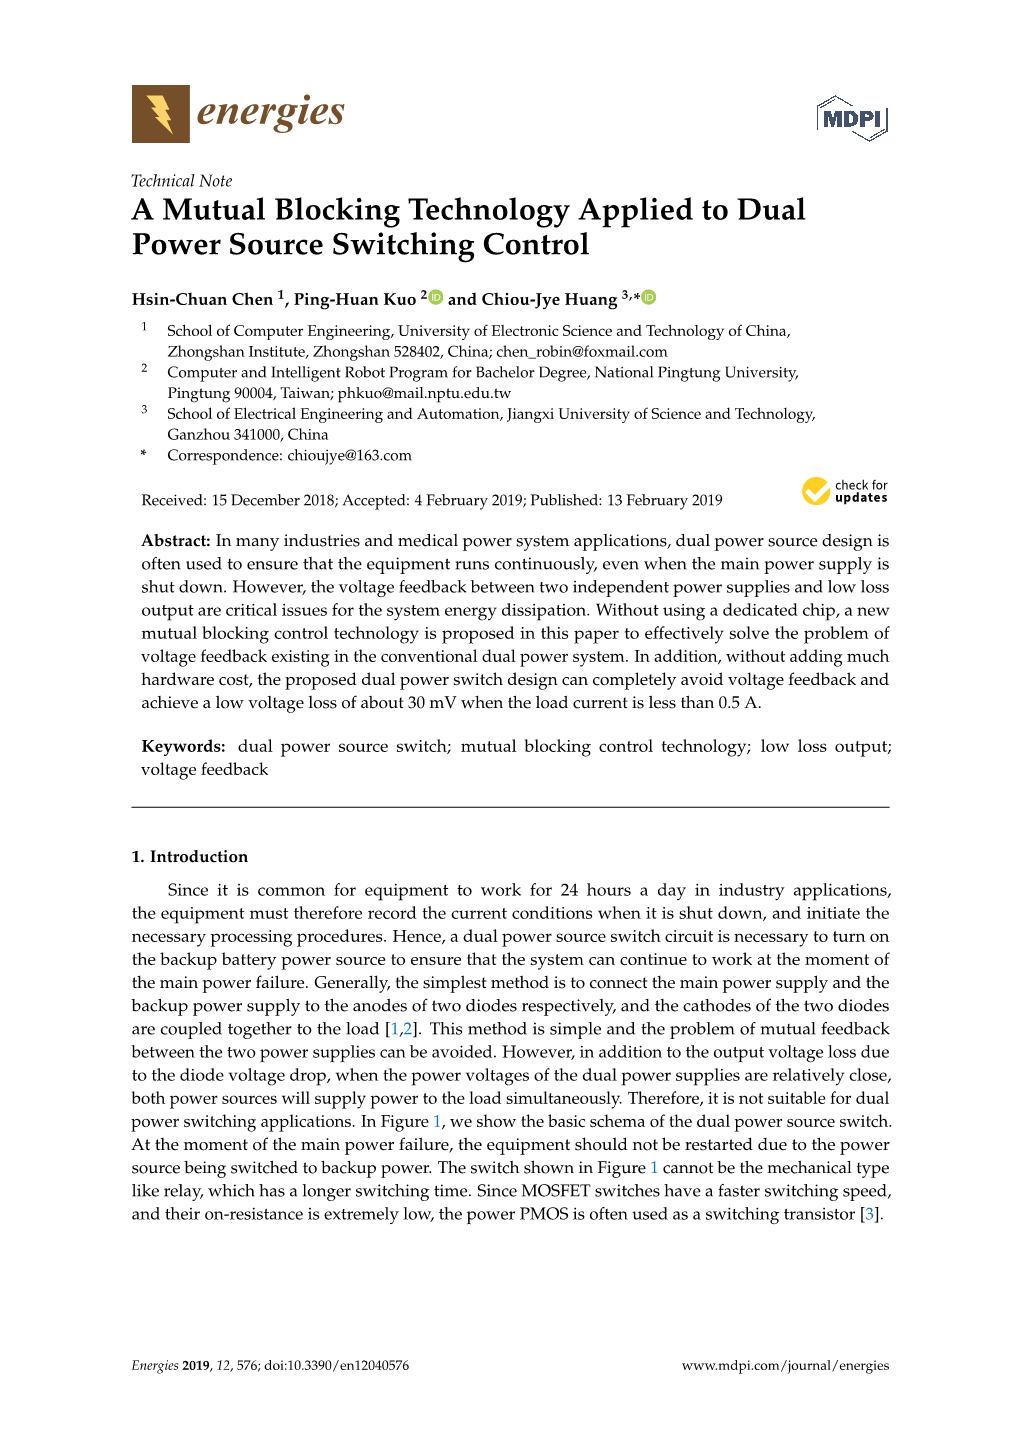 A Mutual Blocking Technology Applied to Dual Power Source Switching Control